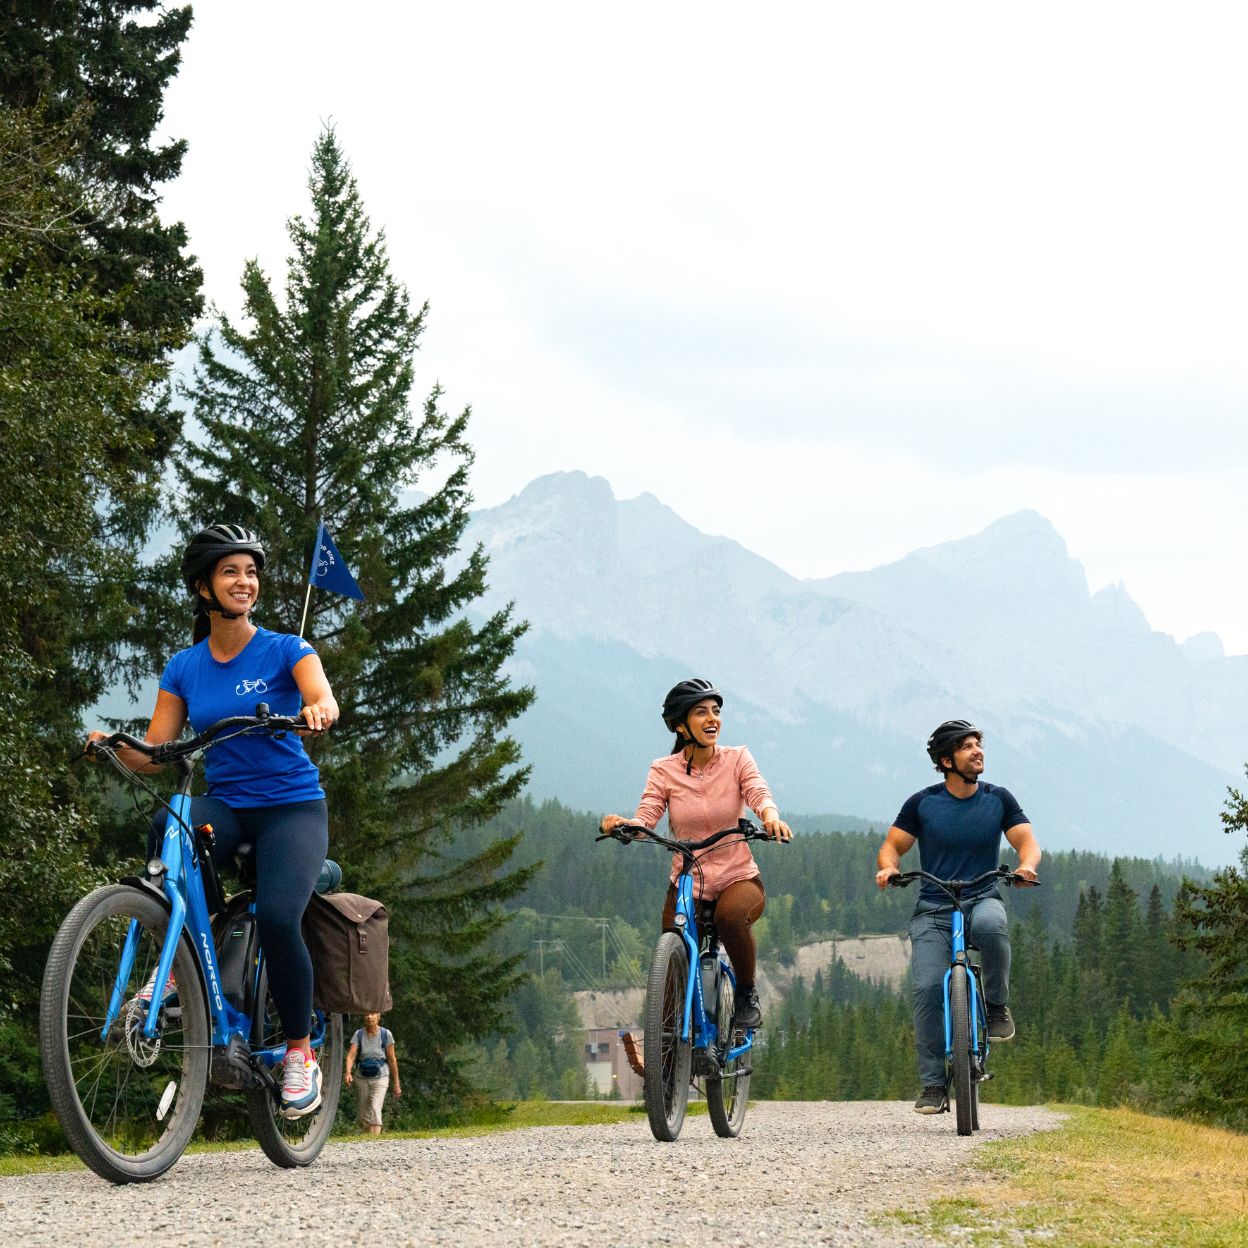 Private Canmore Food Bike Tour - price for a group of 8